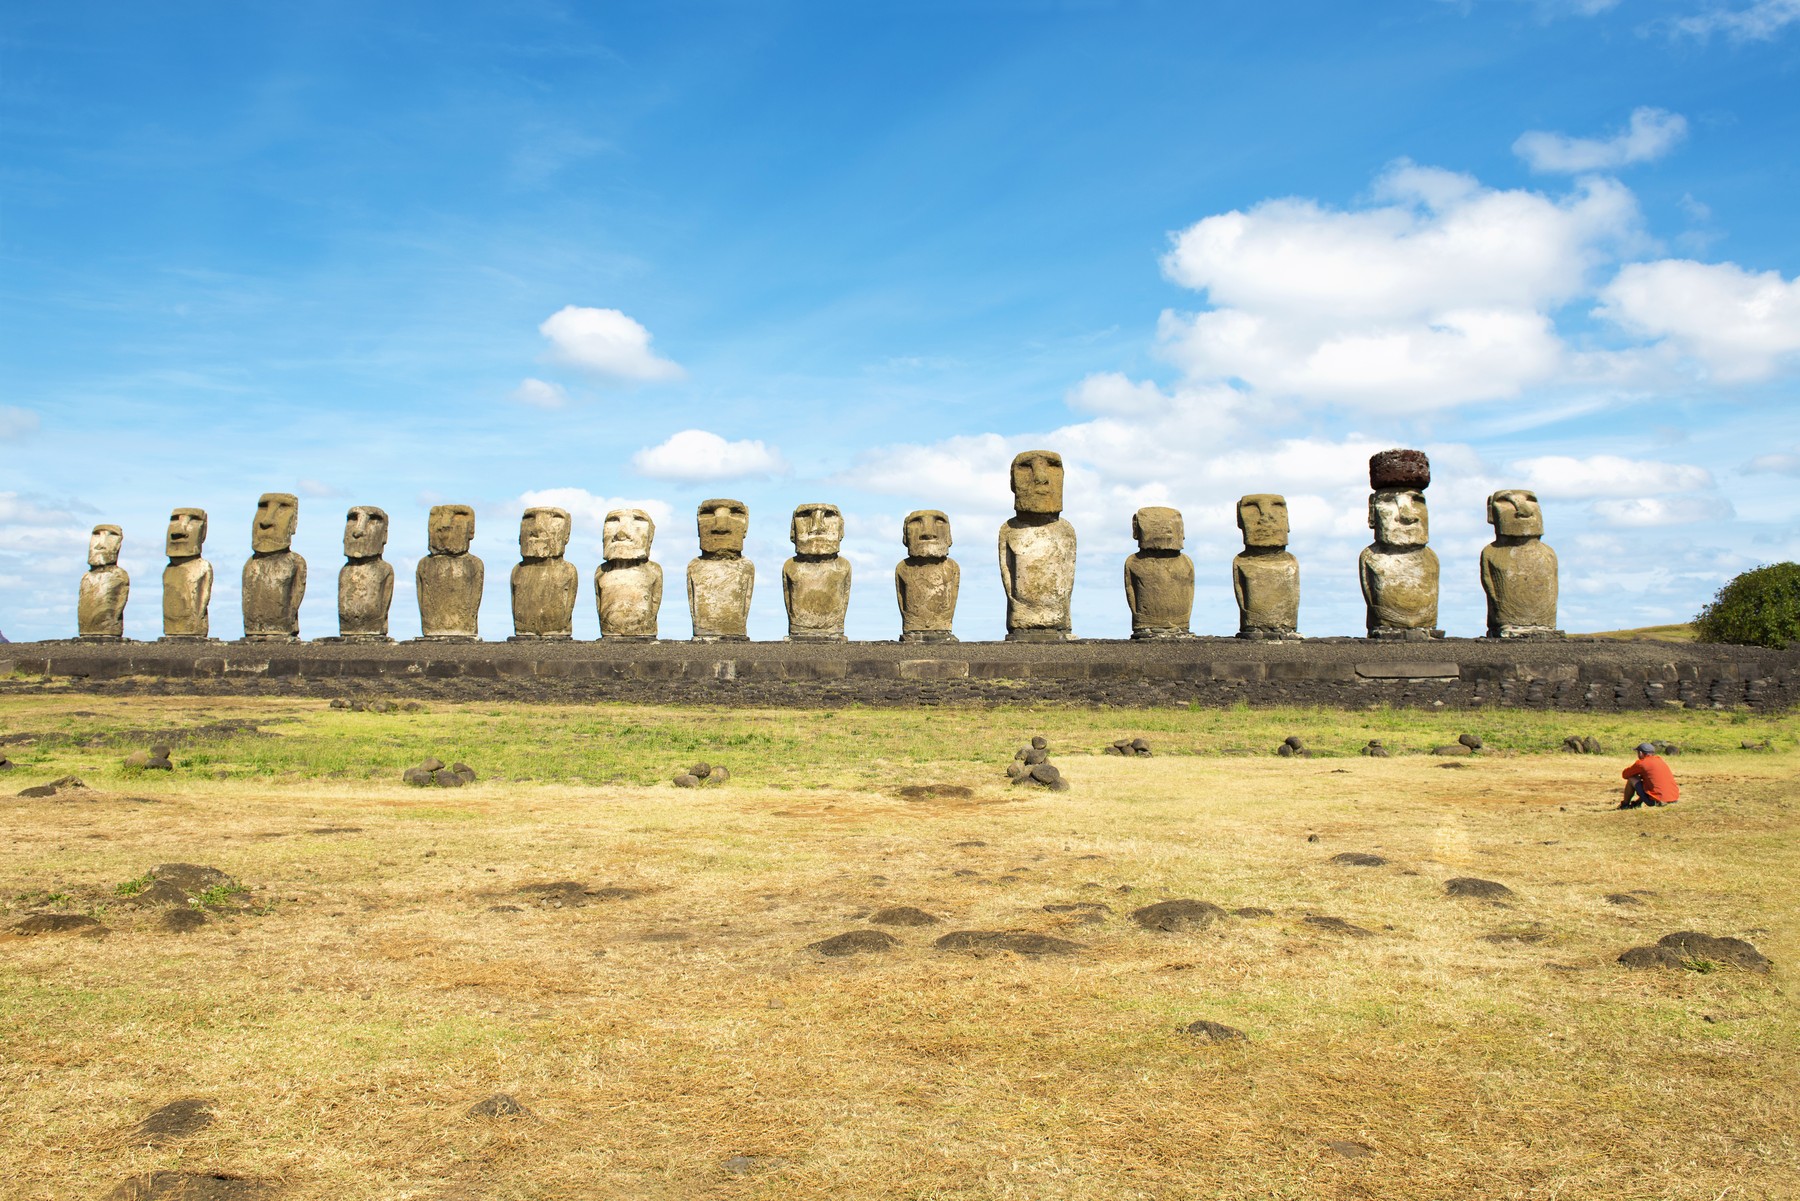 Easter Island's biggest mystery: How can moai statues move?